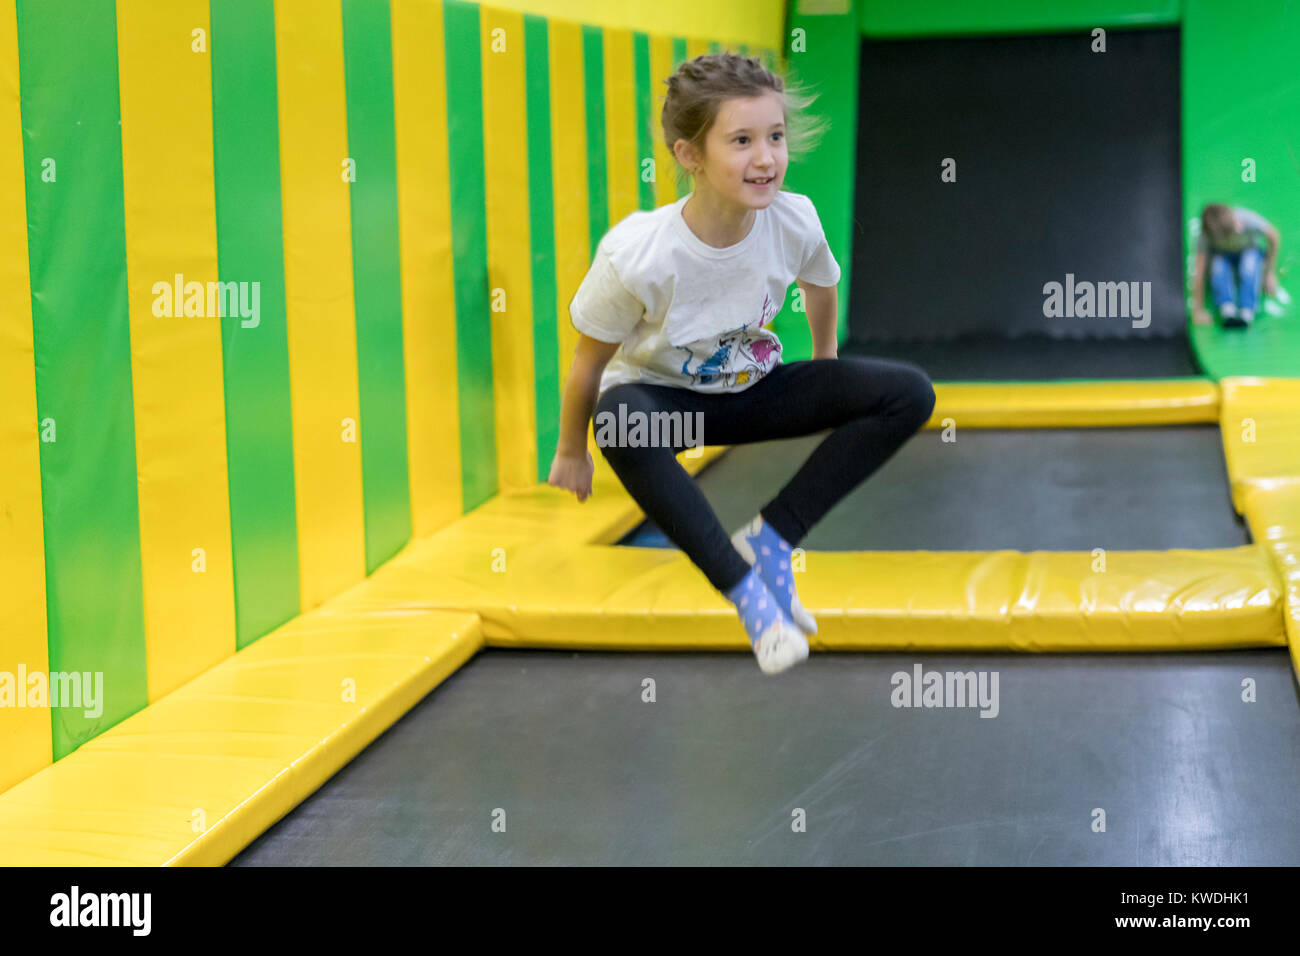 girl jumping on a trampoline Stock Photo